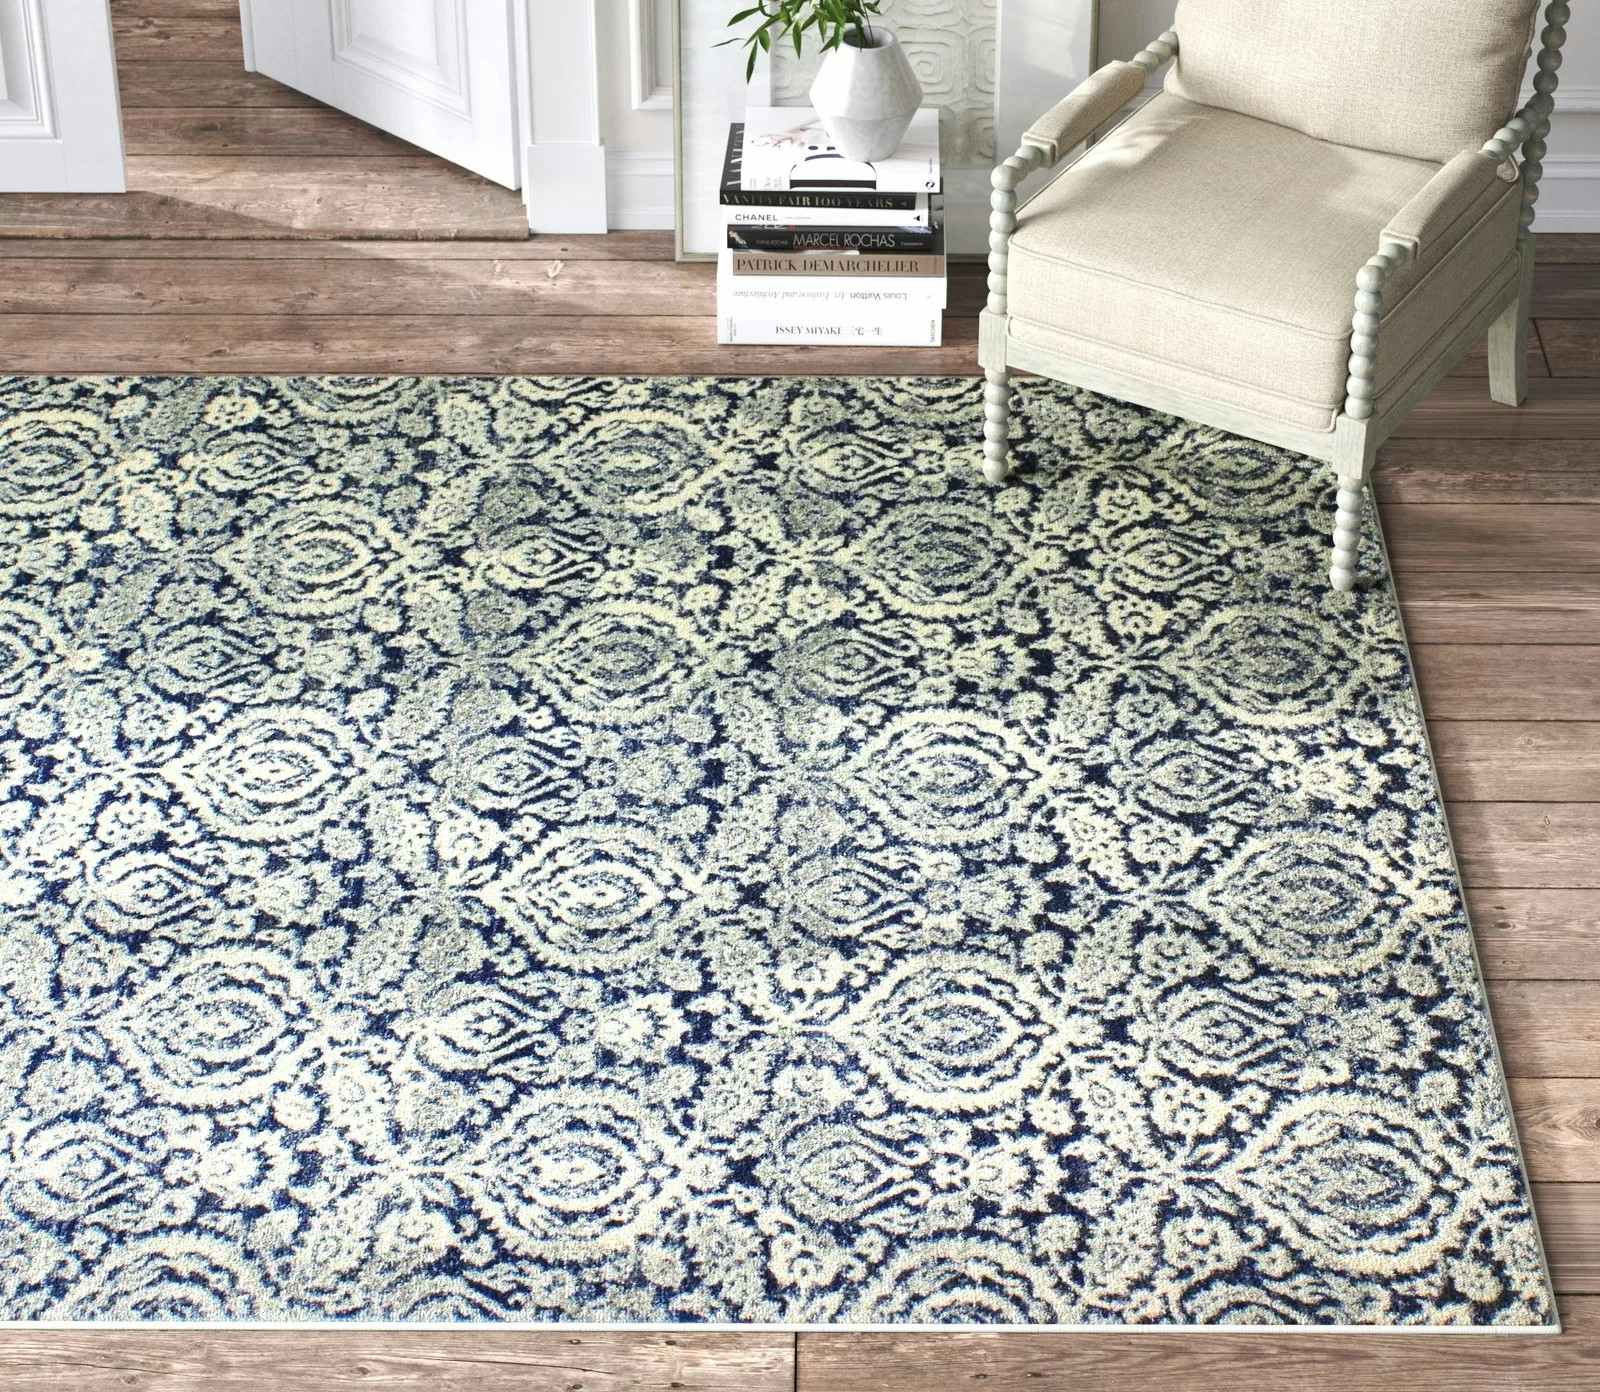 way day kelly clarkson home - andante power loom rug